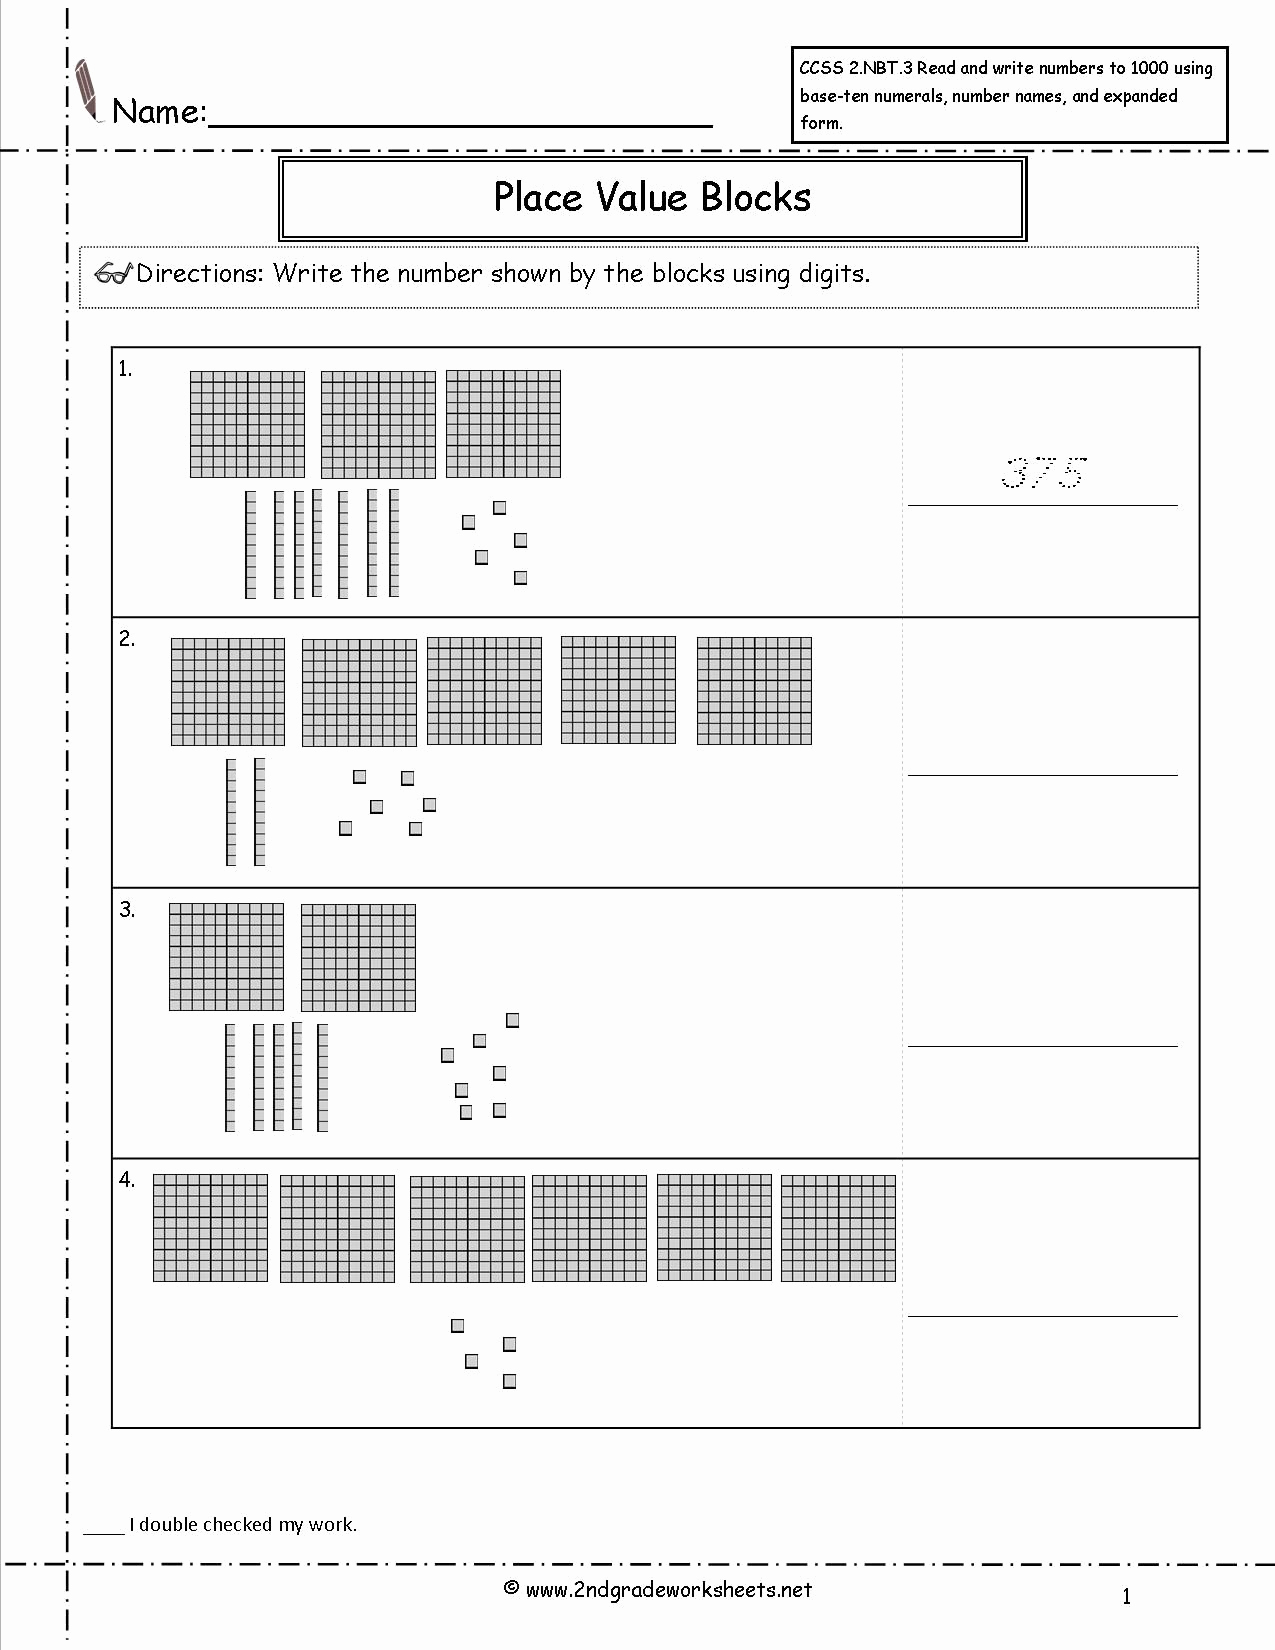 Common Core Worksheets Place Value Best Of 2nd Grade Math Mon Core State Standards Worksheets